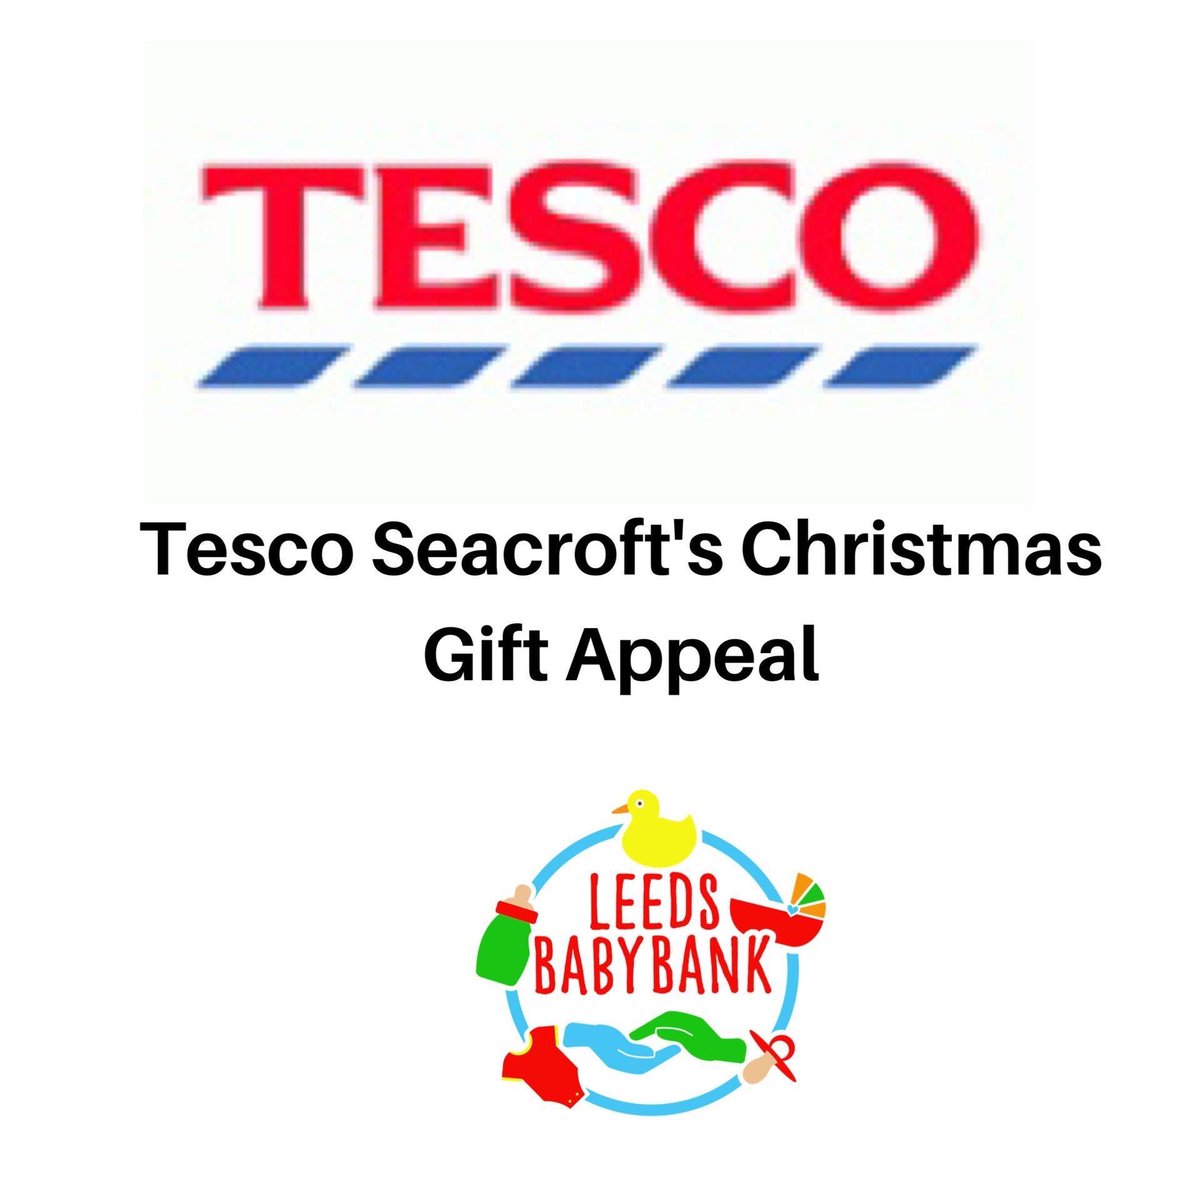 Leeds baby bank are one of the recipients of Tesco Seacroft's Christmas Gift Appeal, which runs until 12 December. If you can make a donation we would be very grateful 

** Shares appreciated **

 #leedsbabybank #tesco #tescoseacroft #giftappeal  #thankyou